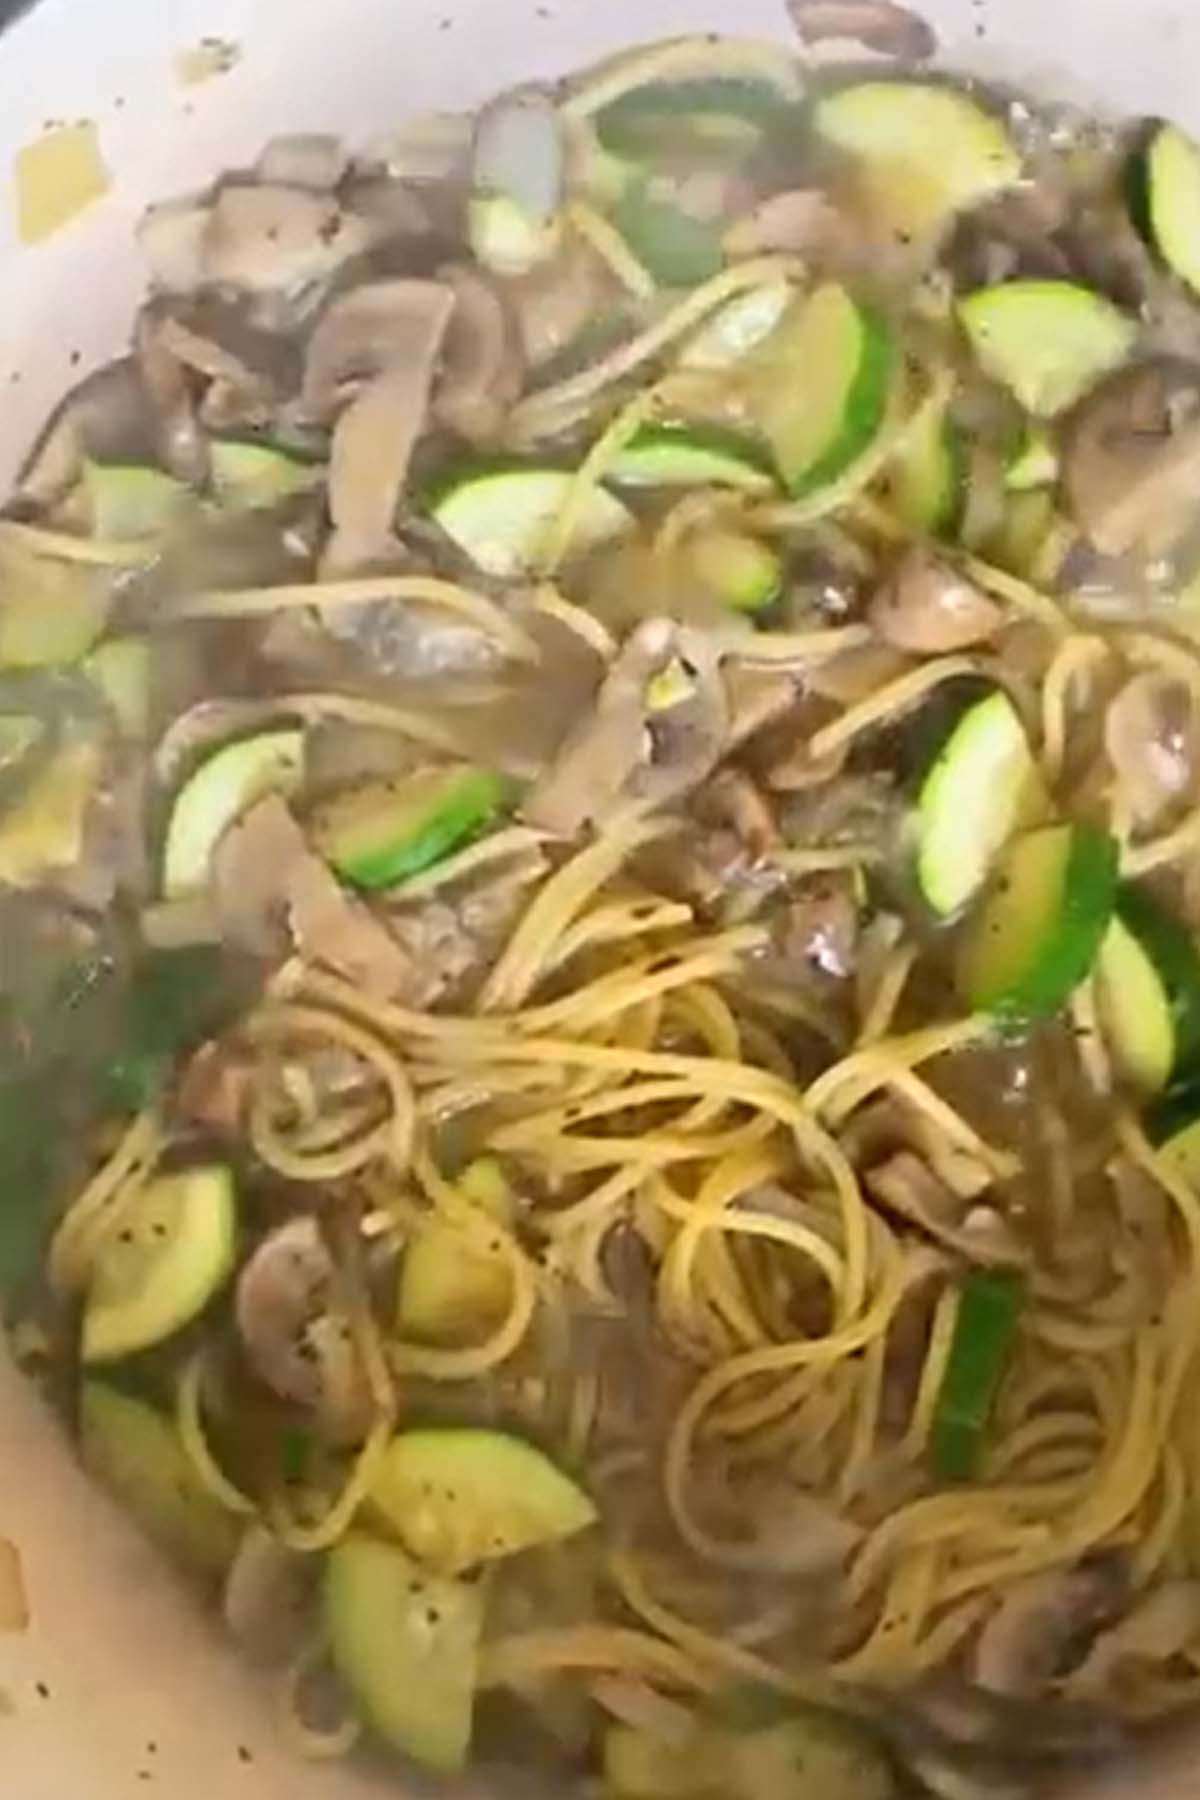 Pasta cooking in water with zucchini and mushrooms.